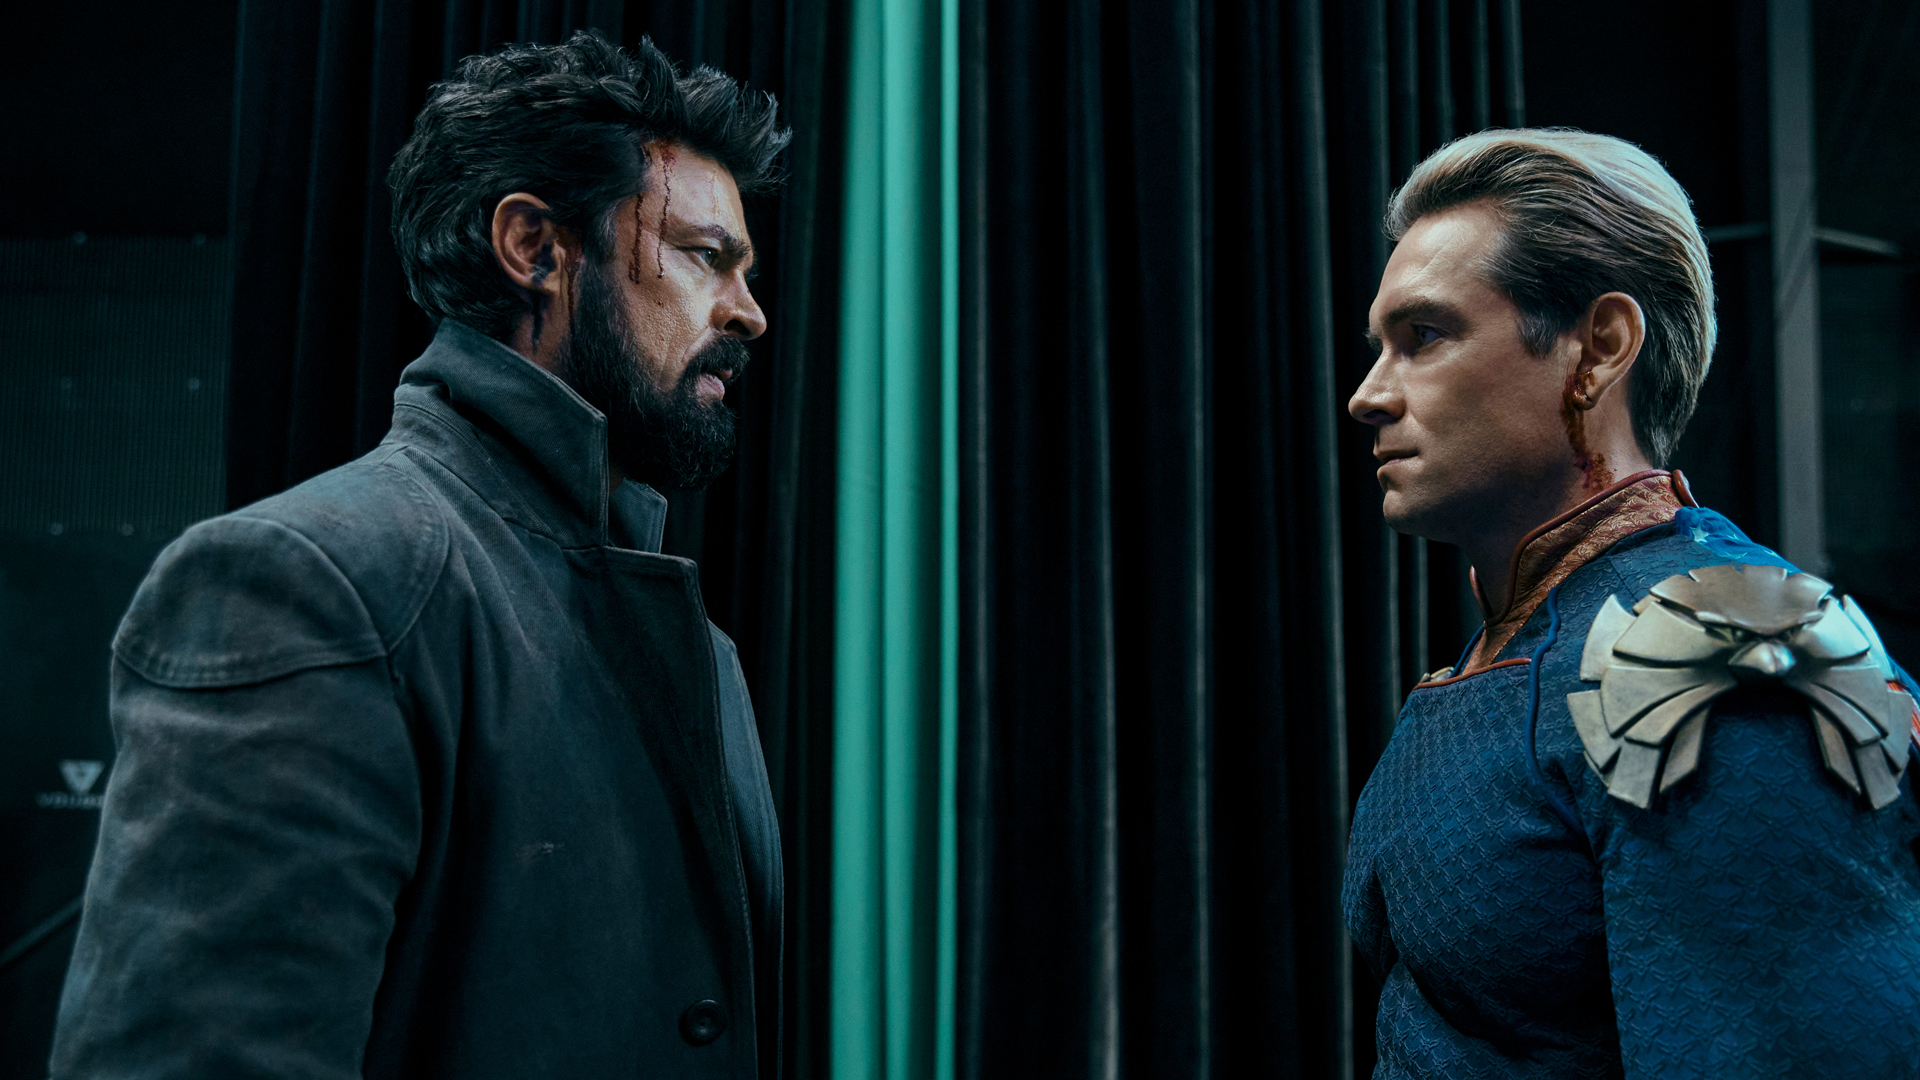 Billy and Homelander stand face-to-face in The Boys season 3